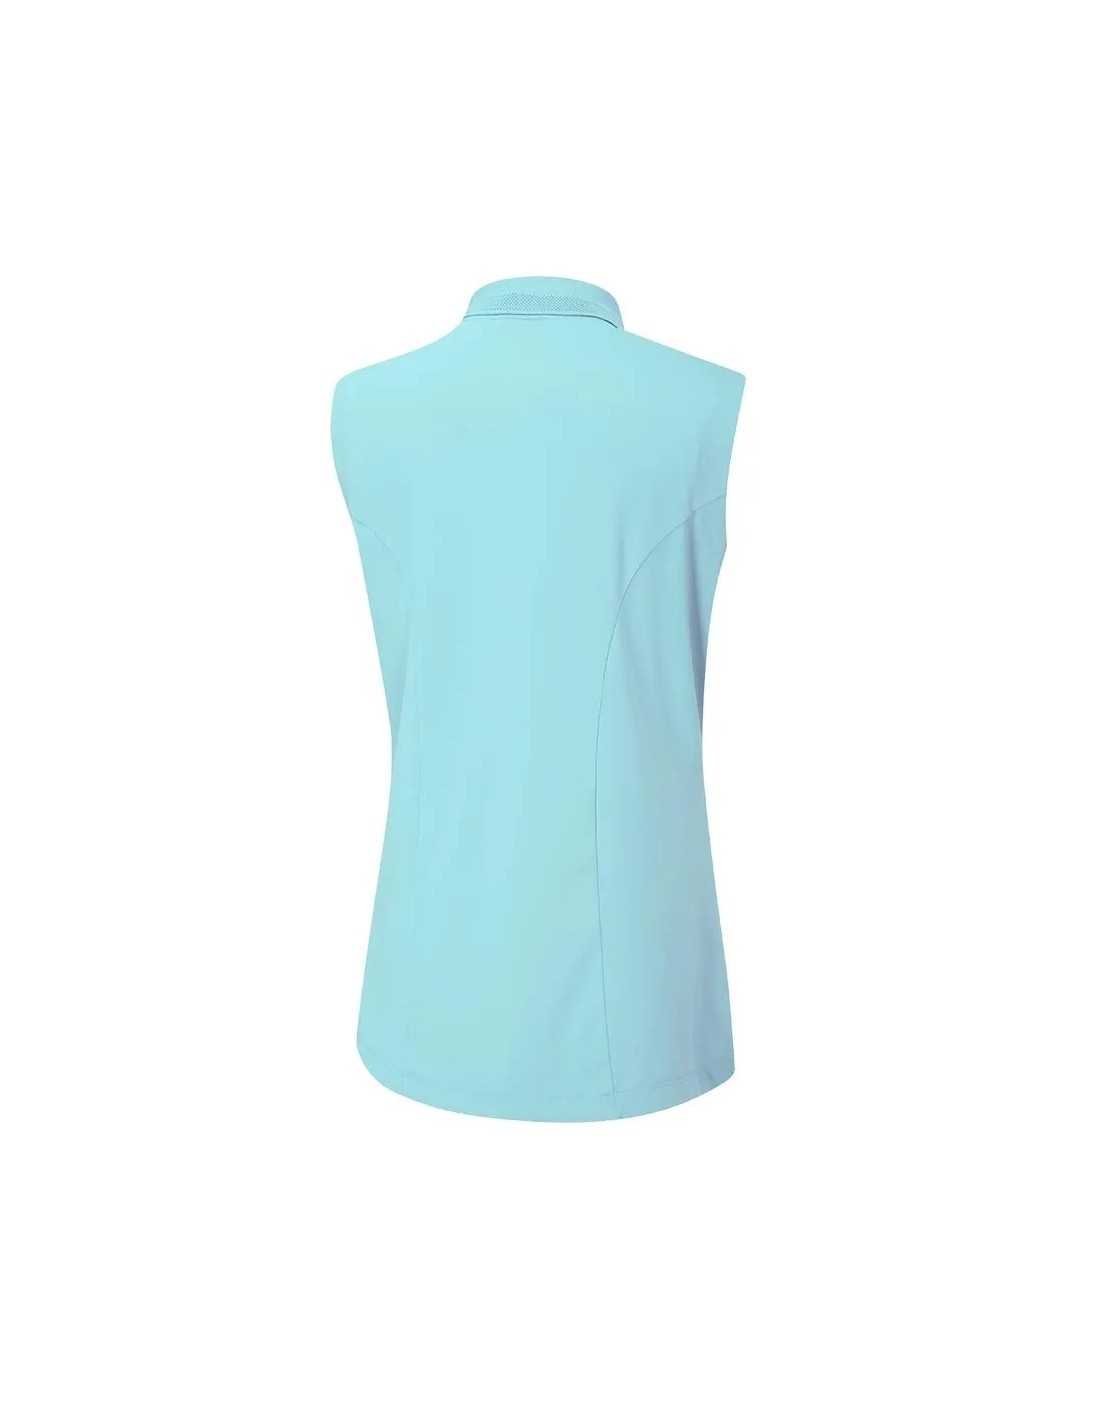 PING SOLENE SHIRT SKY BLUE - POLO MUJER - Women's Golf Polos - The Golf ...